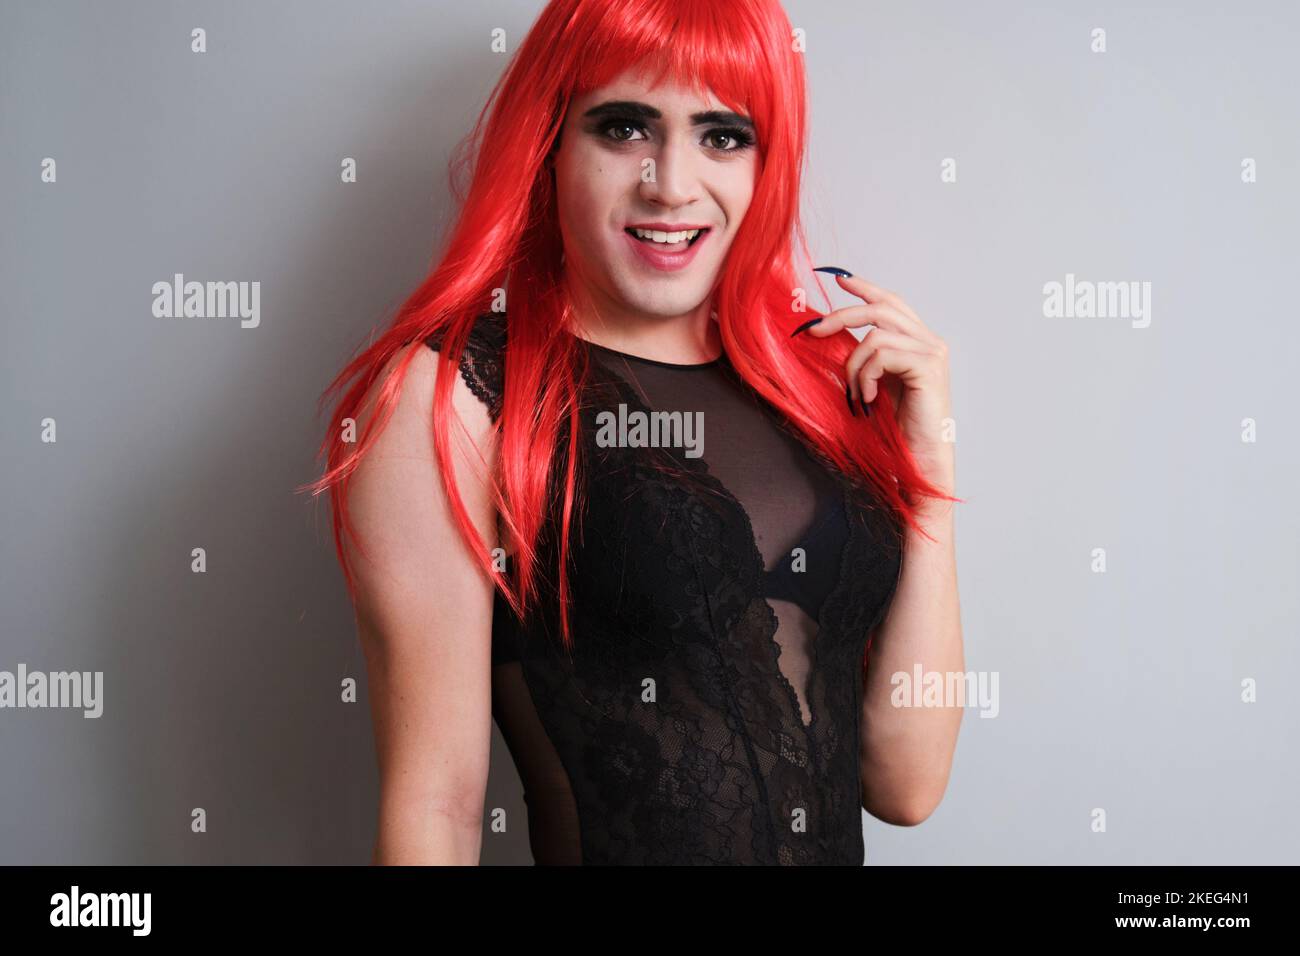 Portrait of gender fluid male dressed as female smiling and looking at camera. Stock Photo